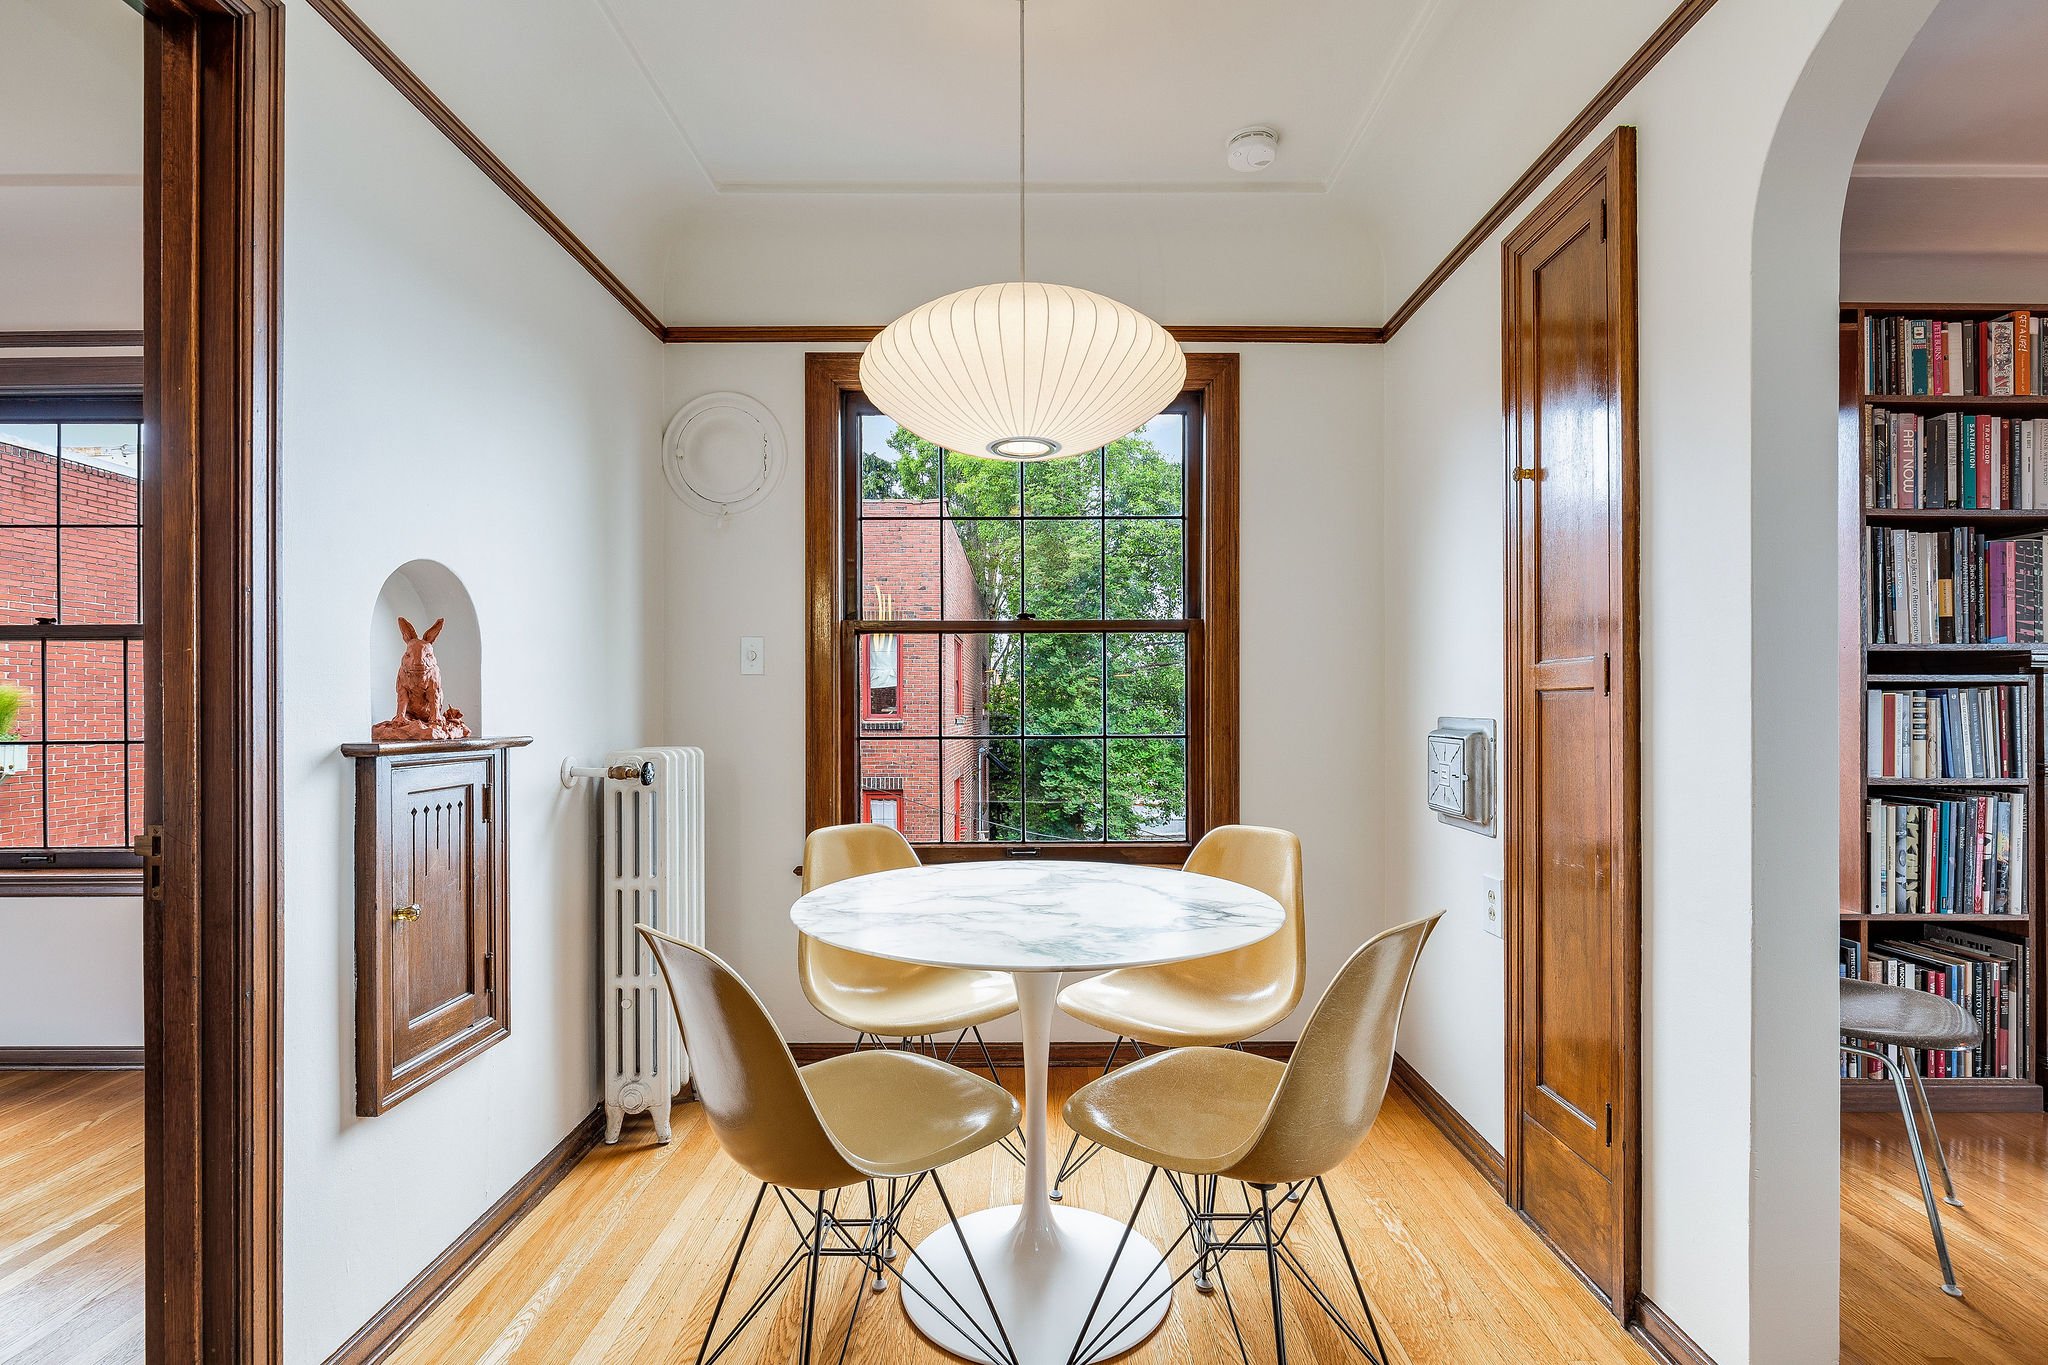 The dining space easily sits 4 and looks north out to a territorial view. Nelson Saucer Bubble Lamp stays with the home. Eames chairs and Saarinen table negotiable. 